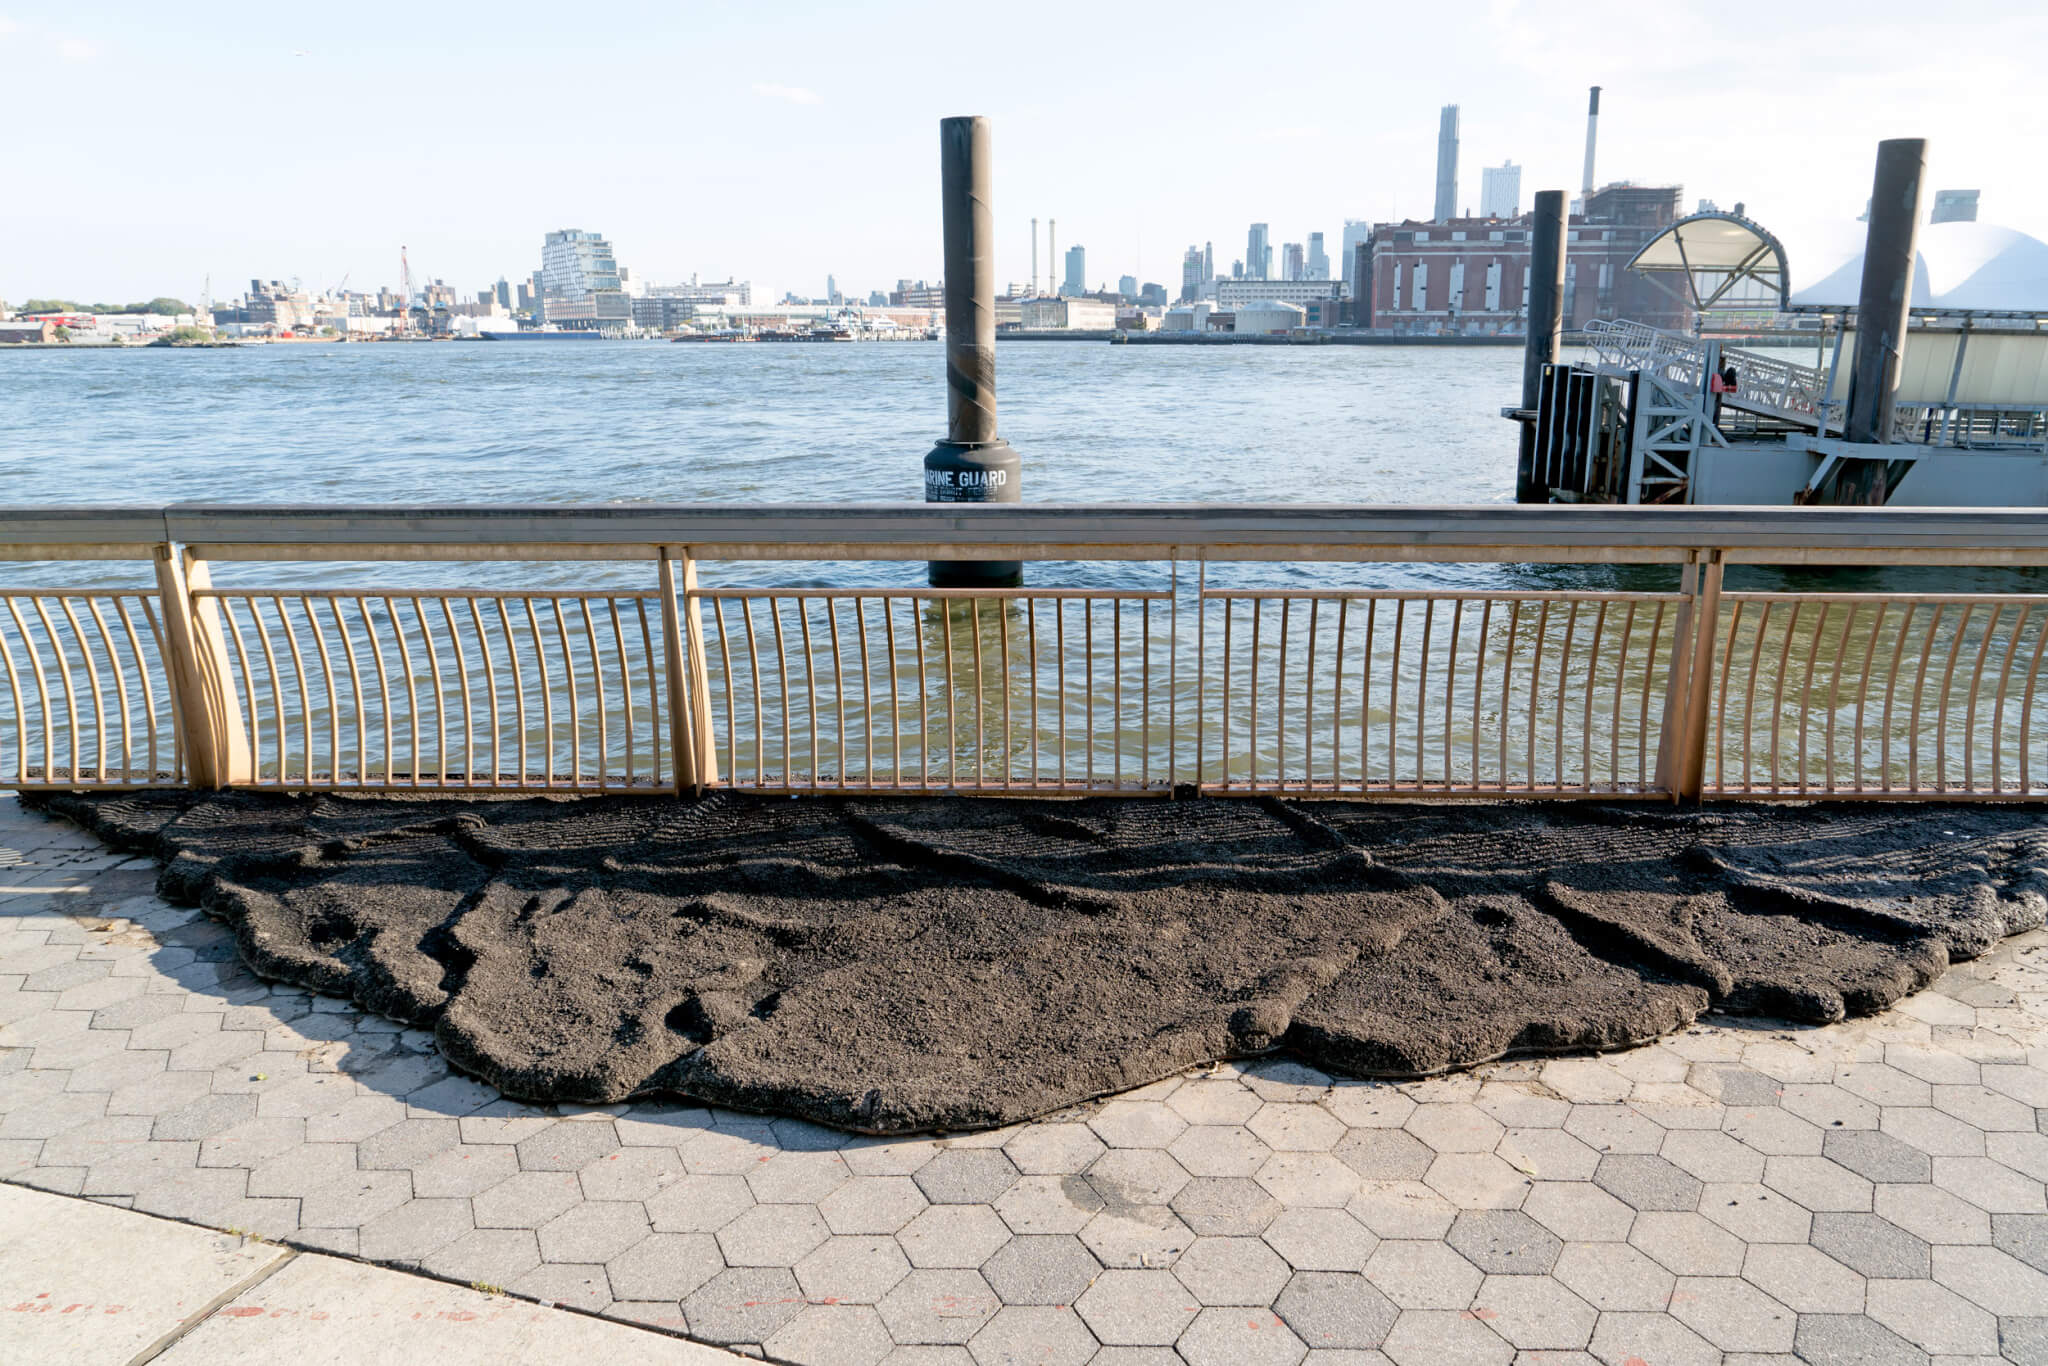 Photo of installation, black asphalt sculpture made to look like a tidal wave emerging from the wall barrier of the river.